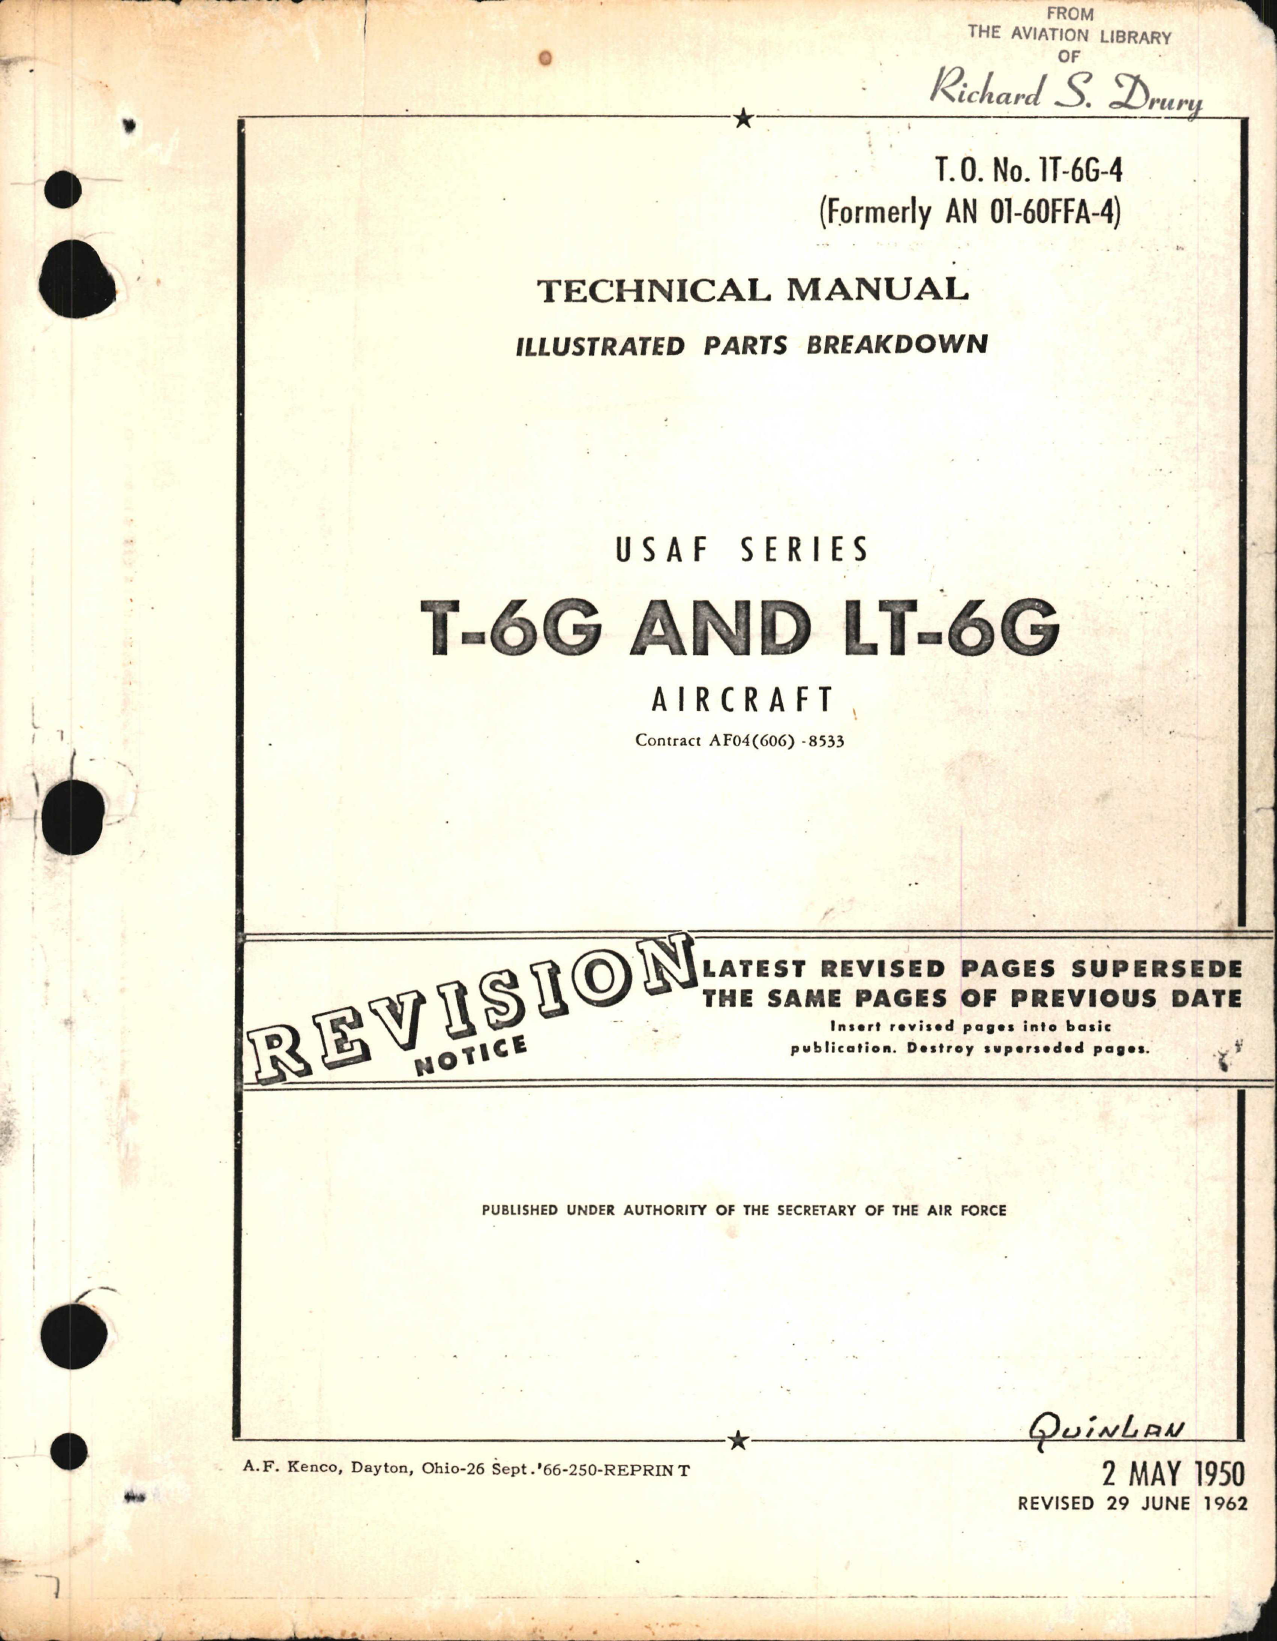 Sample page 1 from AirCorps Library document: Illustrated Parts Breakdown for T-6G and LT-6G 